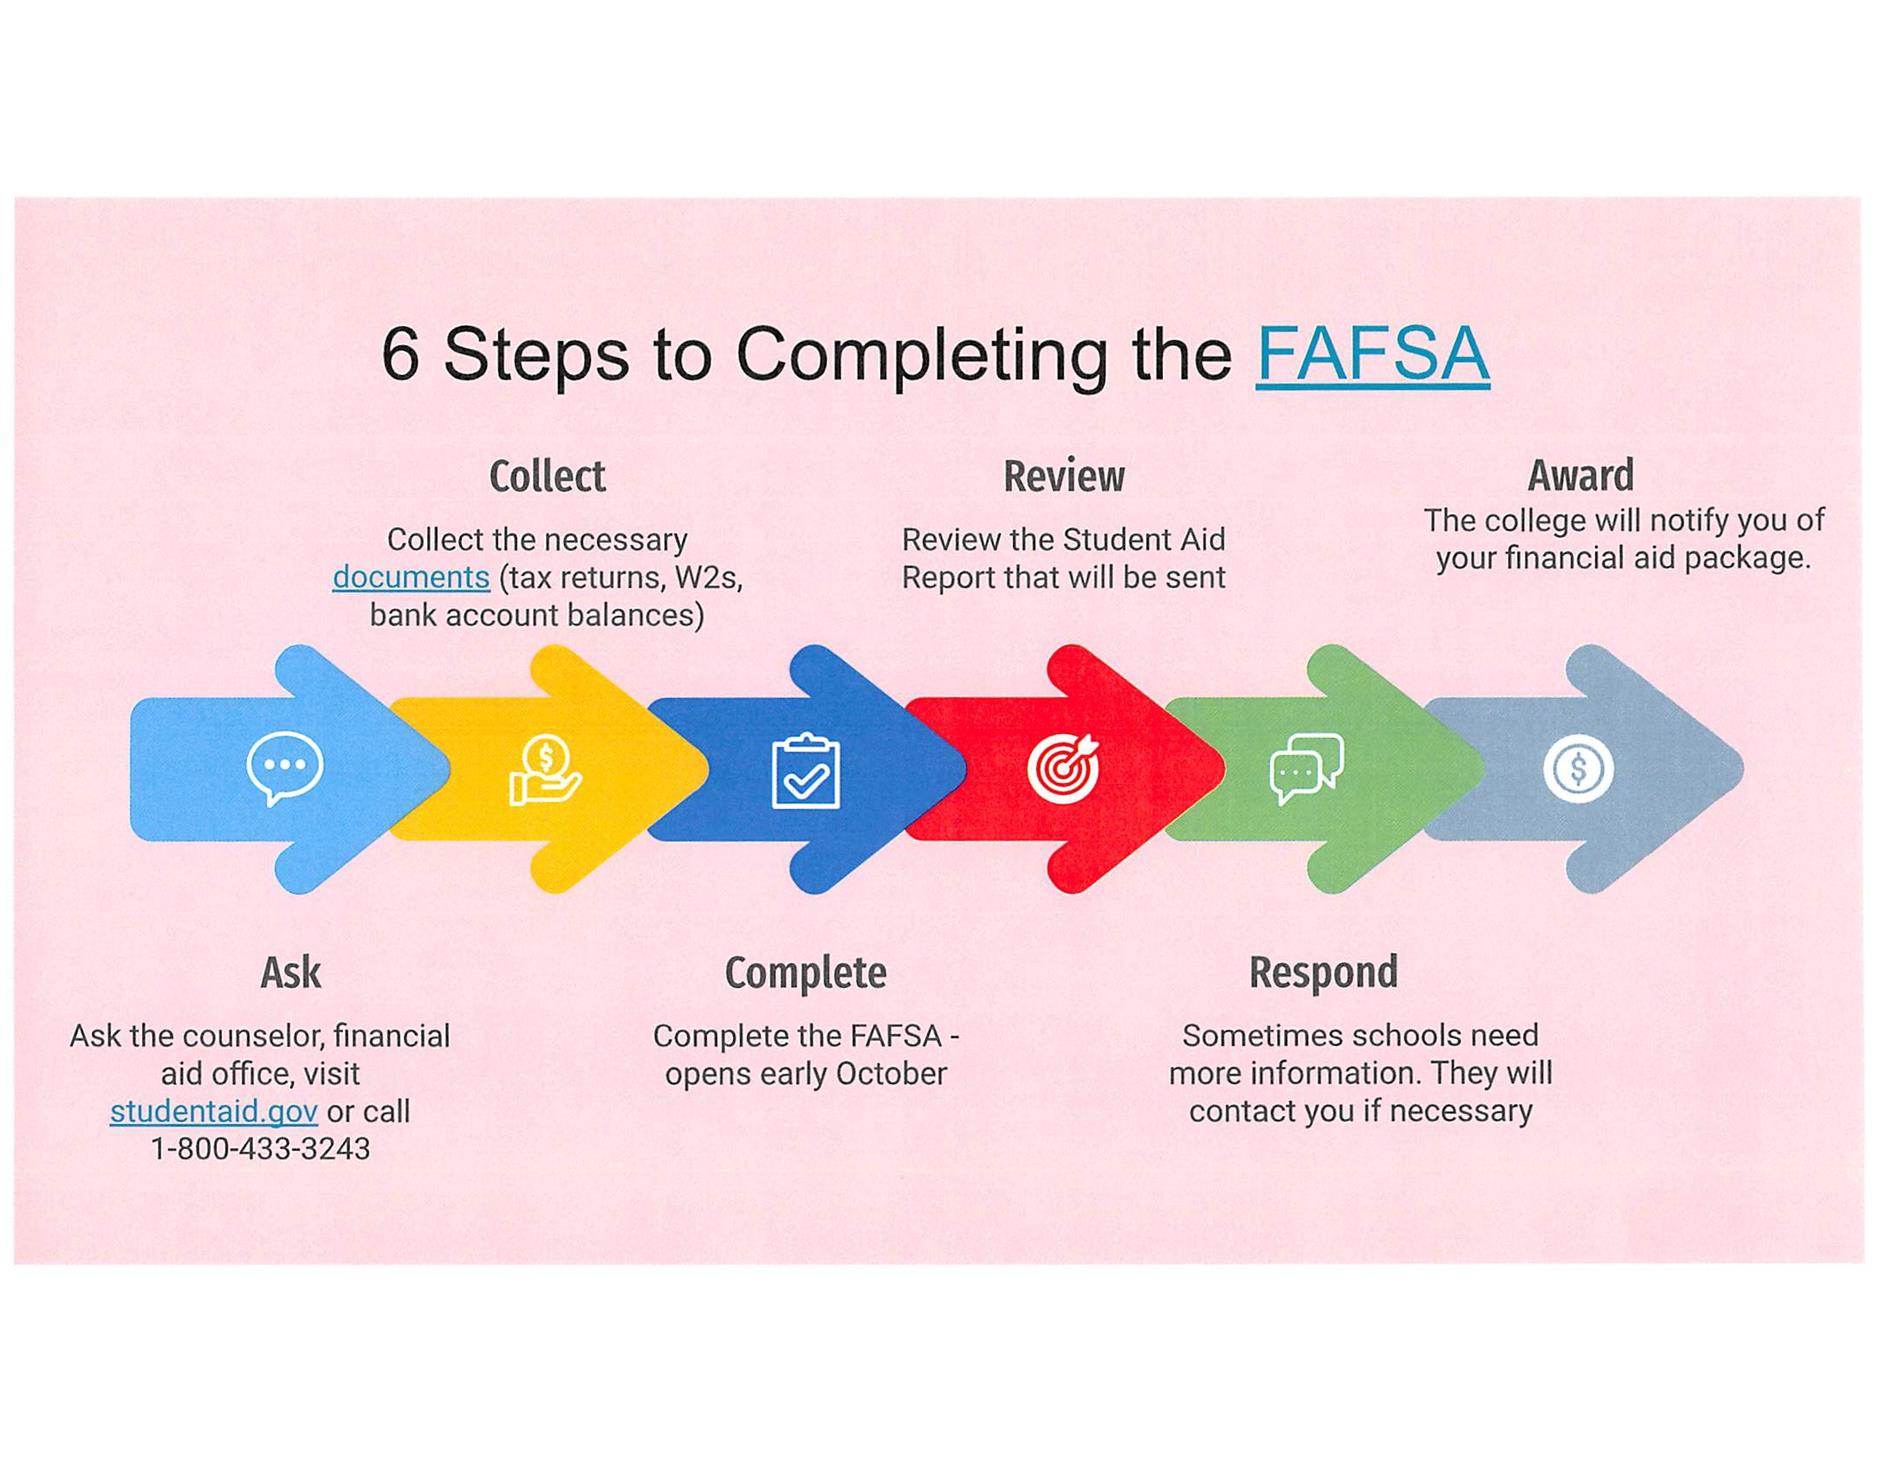 6 Steps to Completing FAFSA